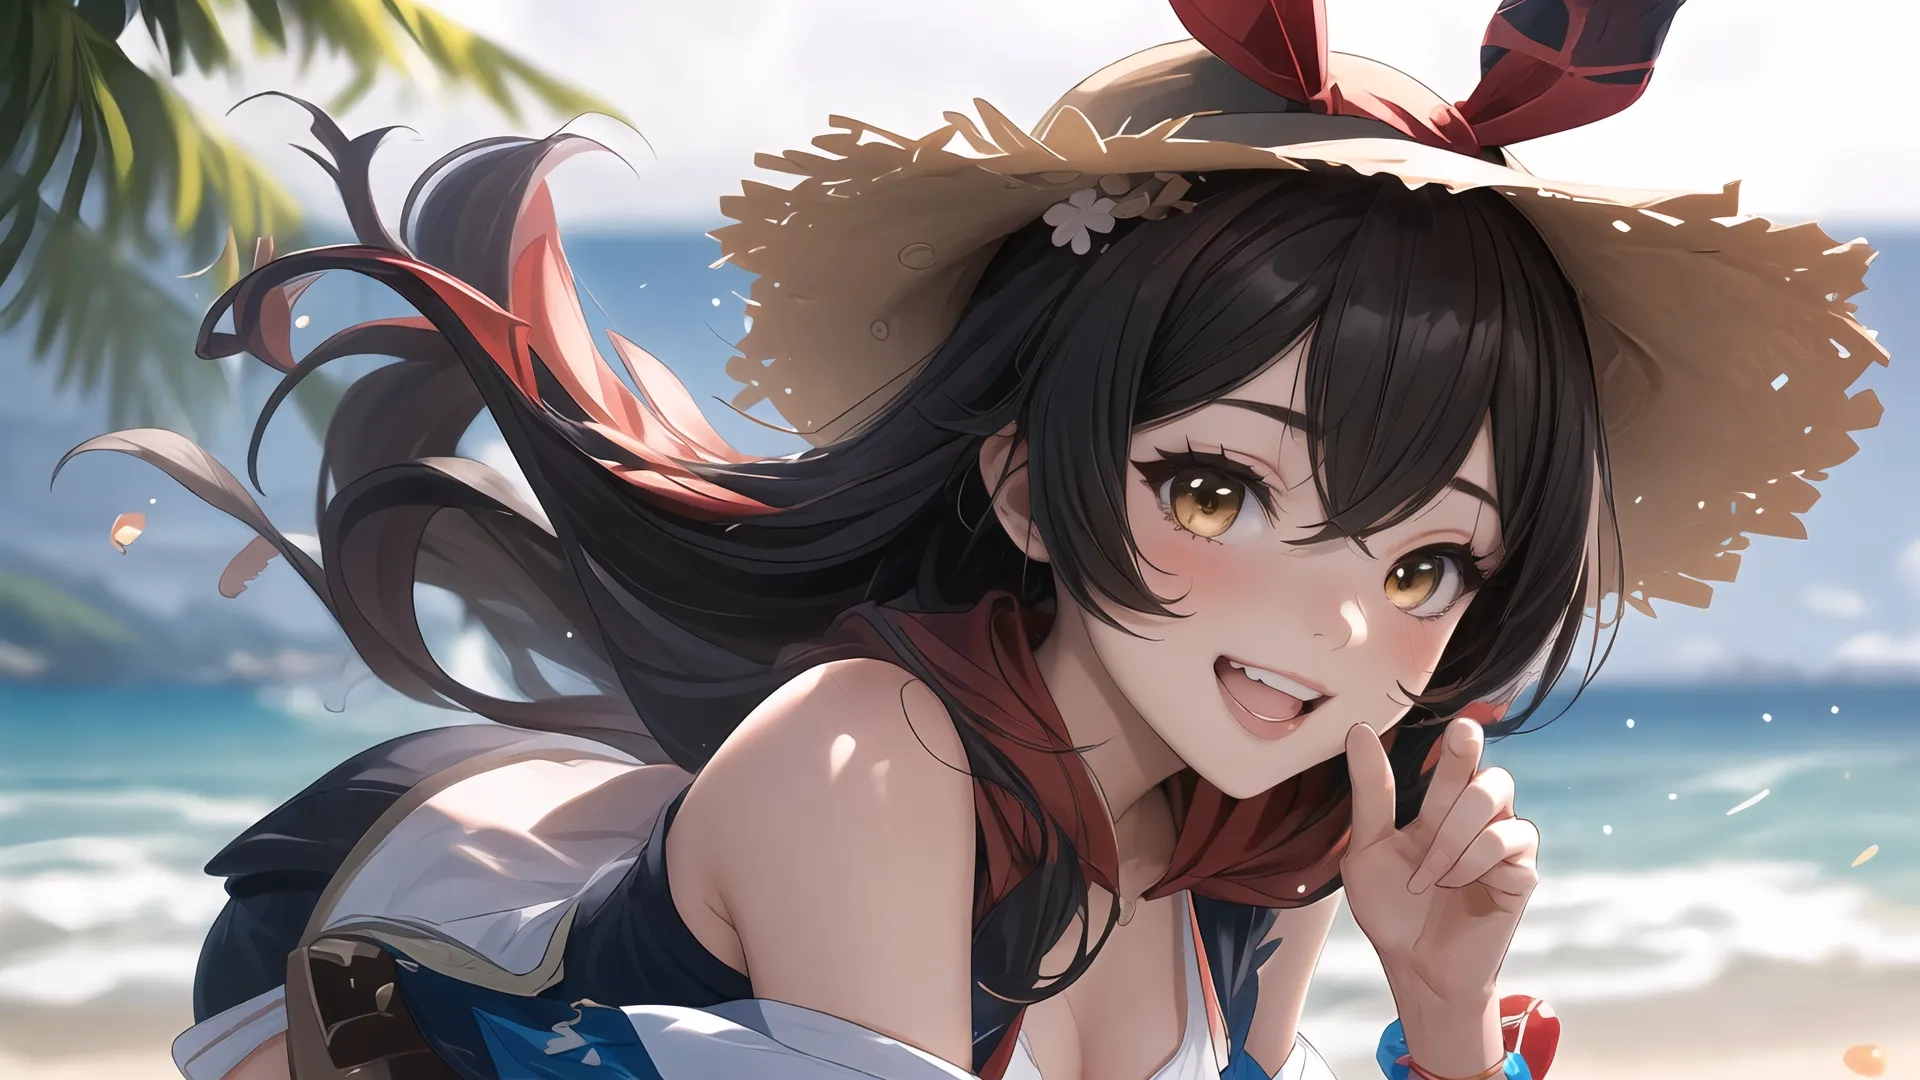 an anime - style female with long black hair laying down and wearing a straw hat near the water and beach area as if blowing an object
